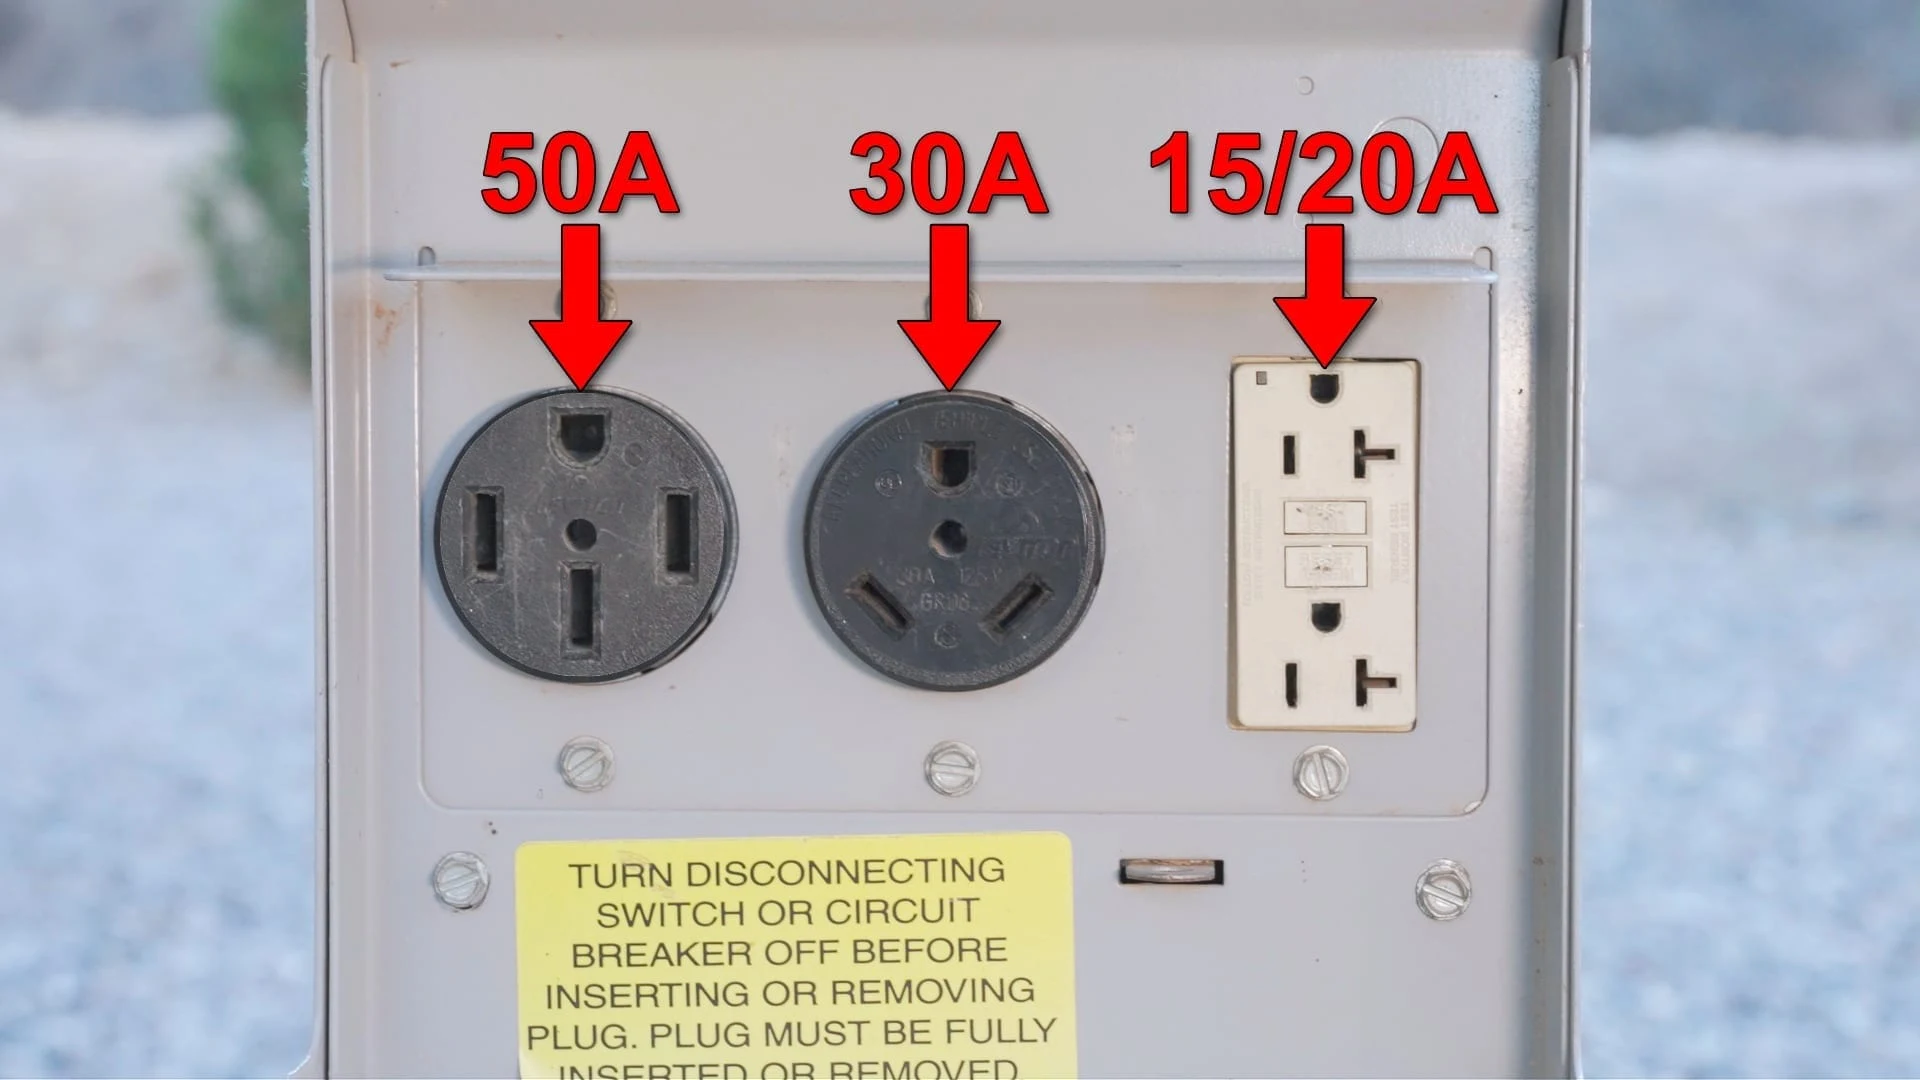 RV microwave not working? Photo of a campsite power pedestal with outlets identifiedwith all three sizes of plugs